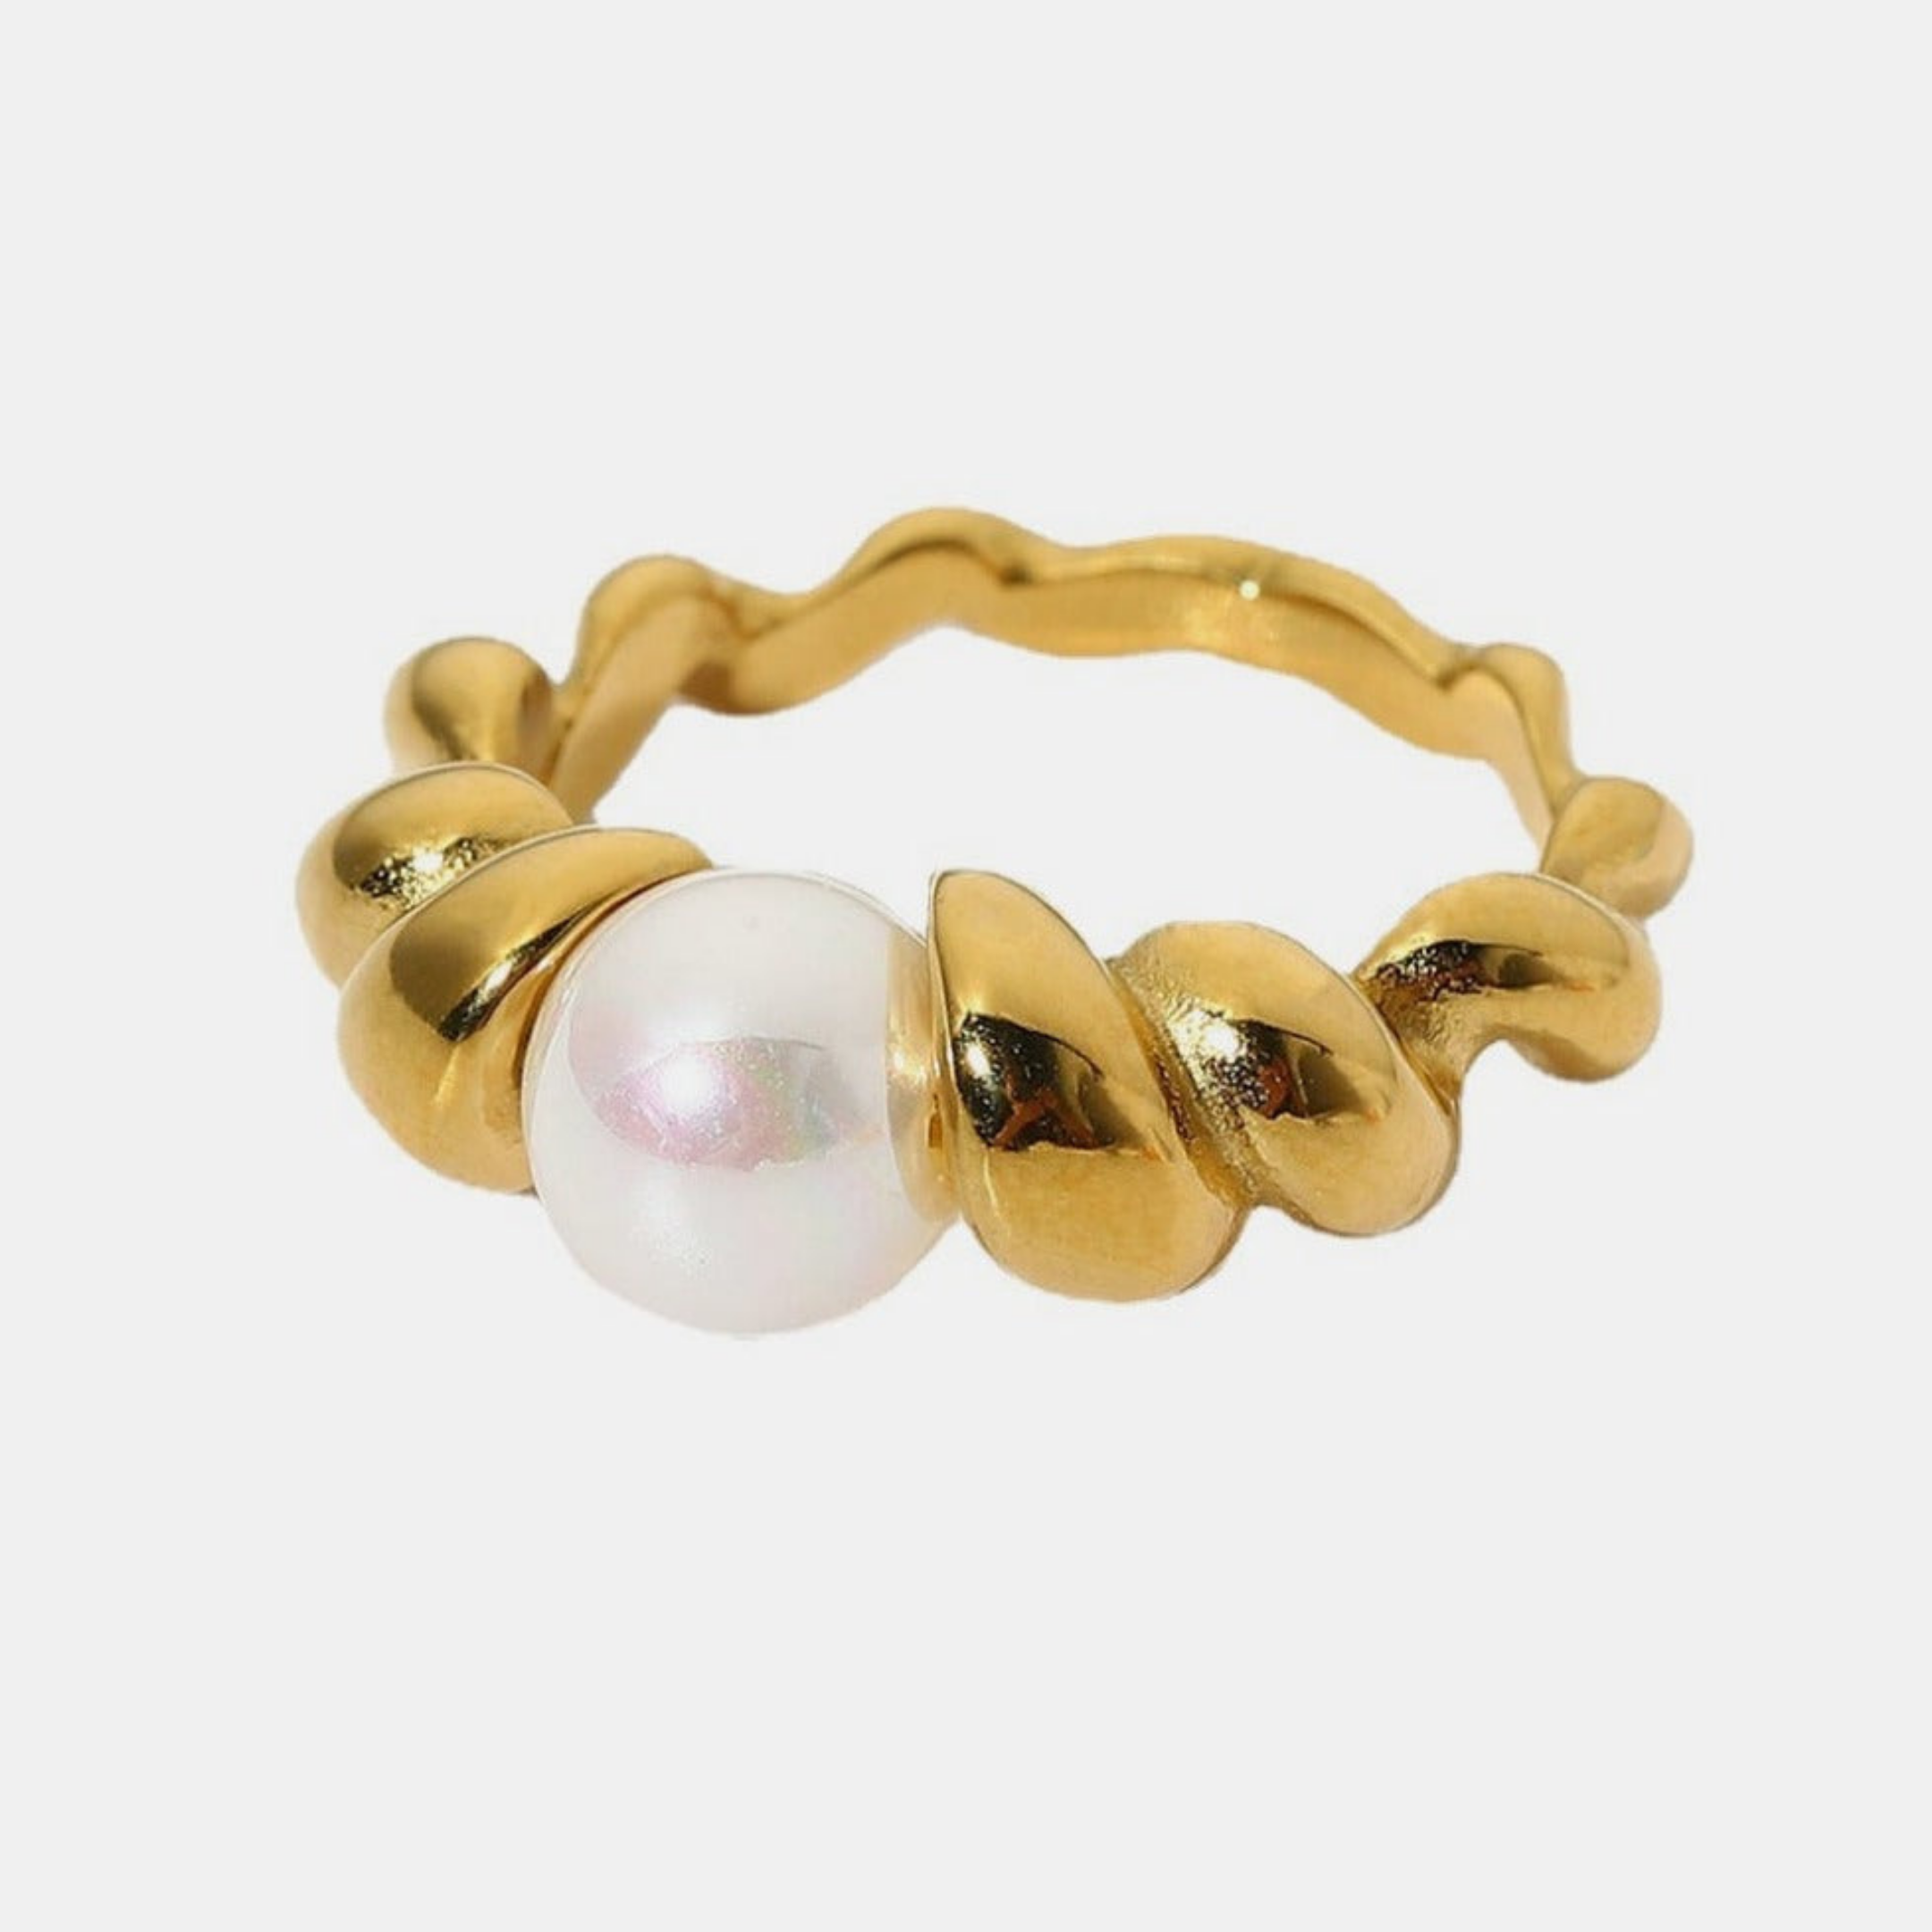 These Pearl Jewelry Pieces Are So Classic, Yet So Stylish